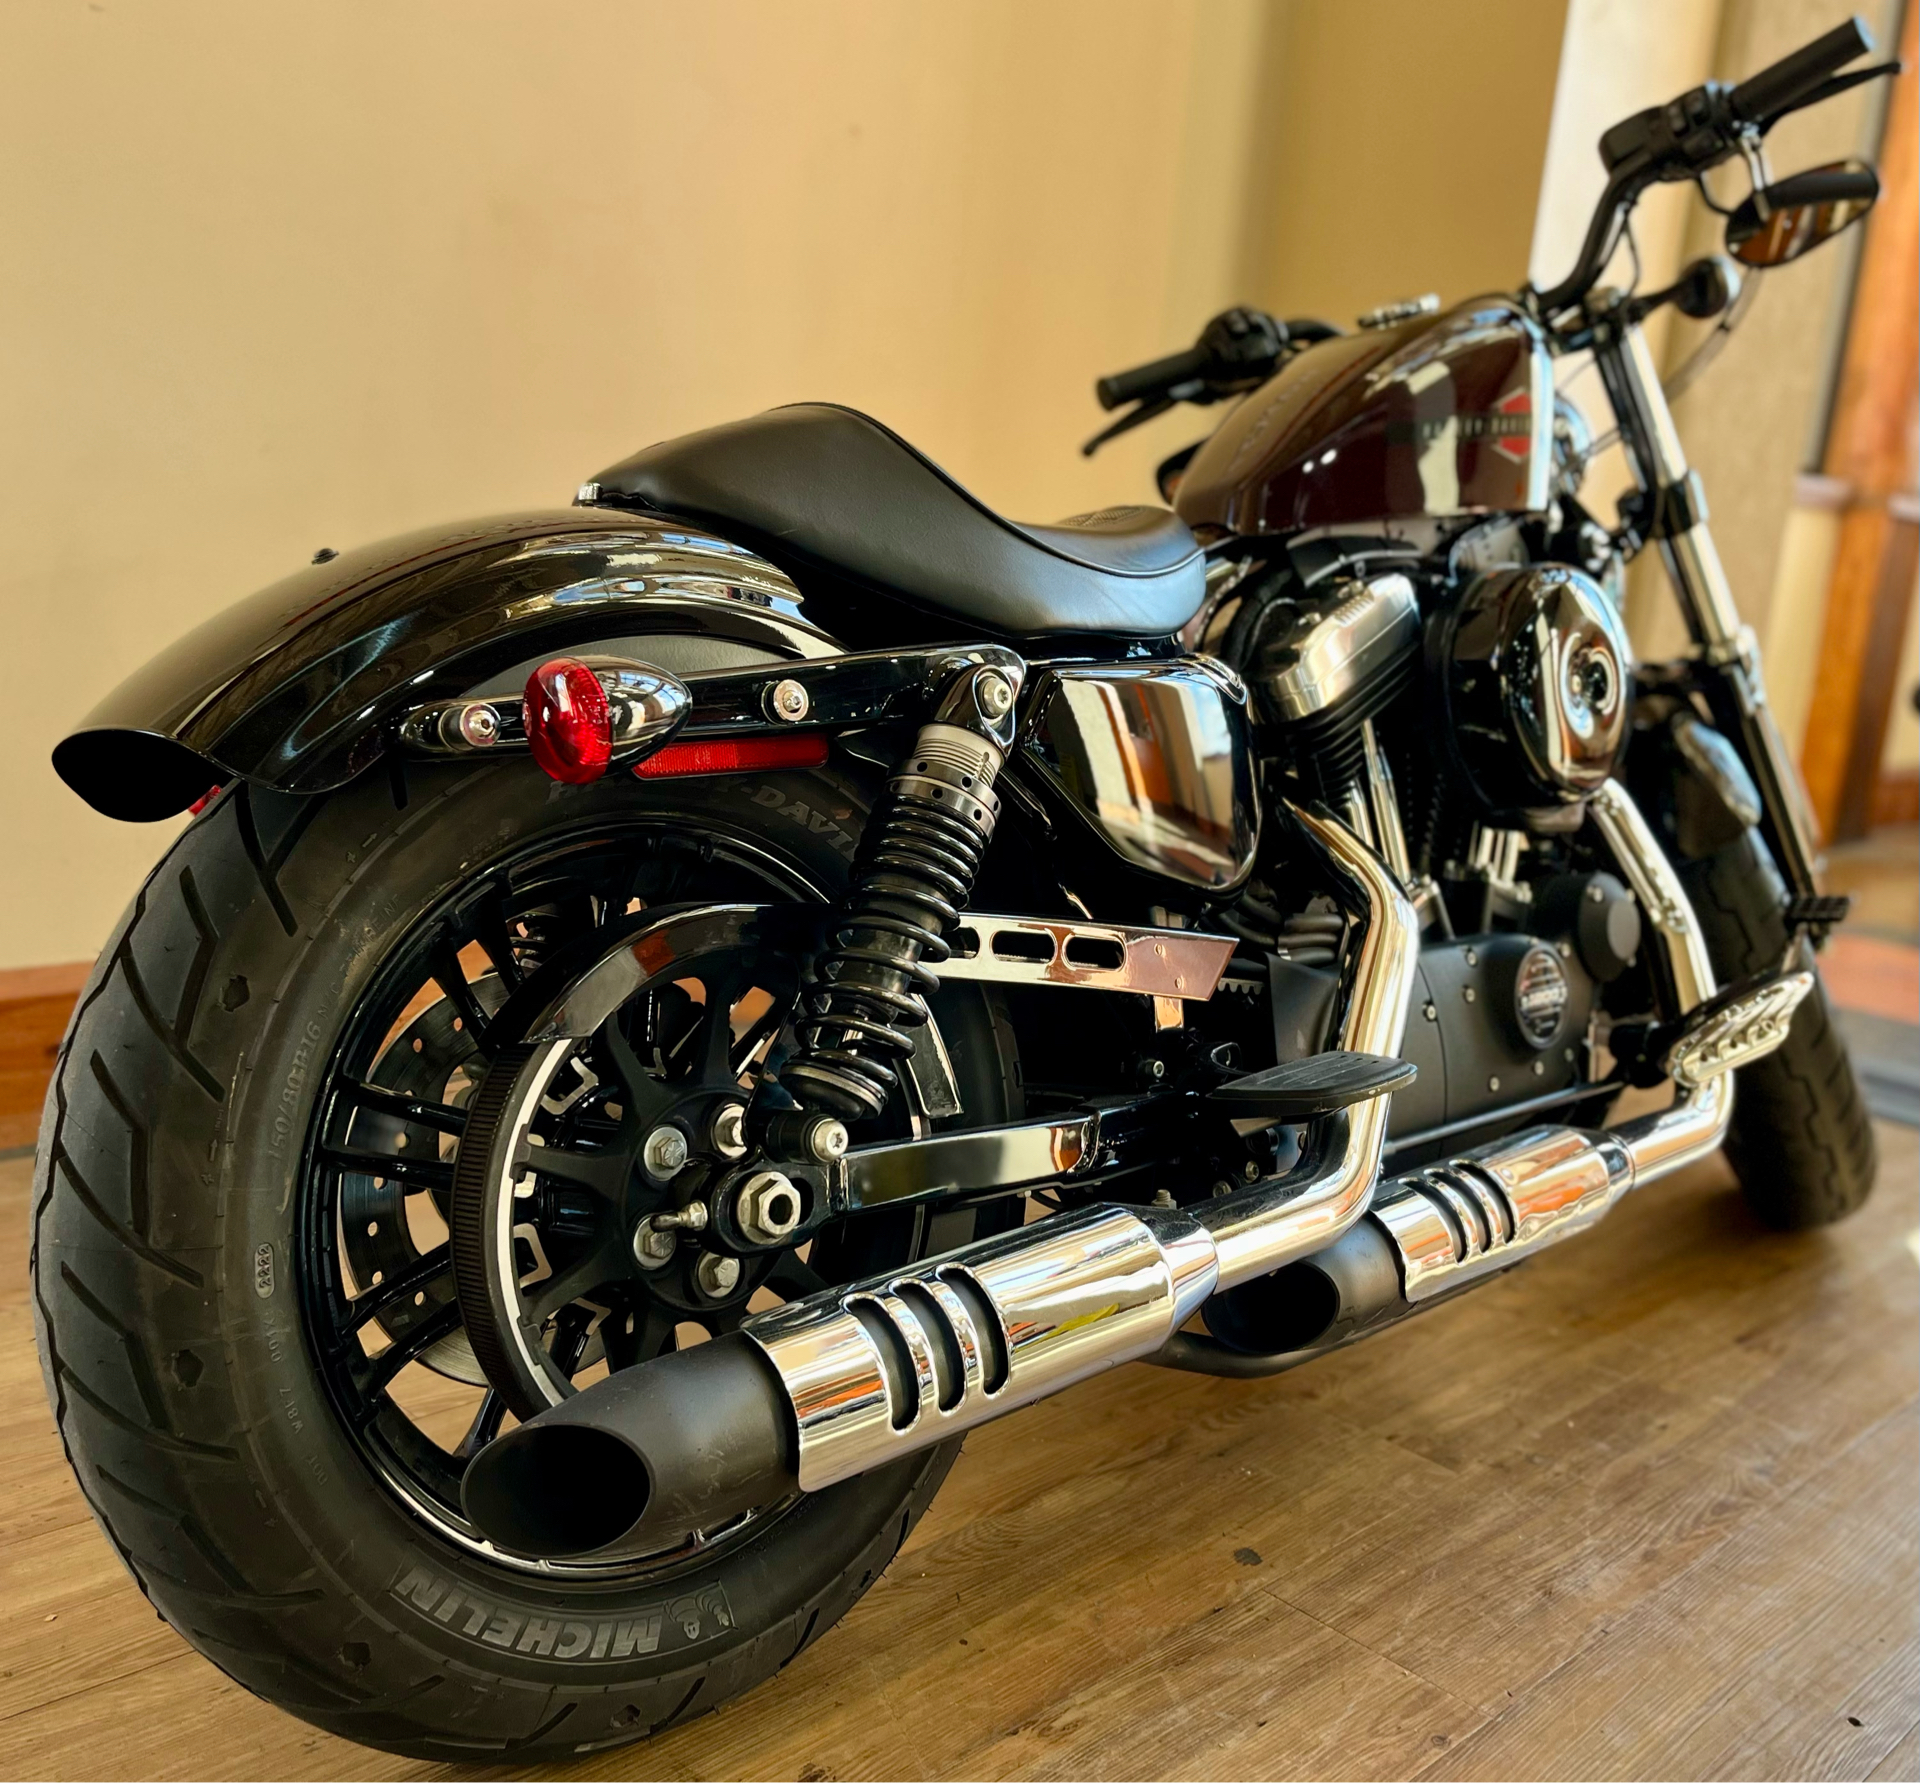 2021 Harley-Davidson Forty-Eight® in Loveland, Colorado - Photo 3